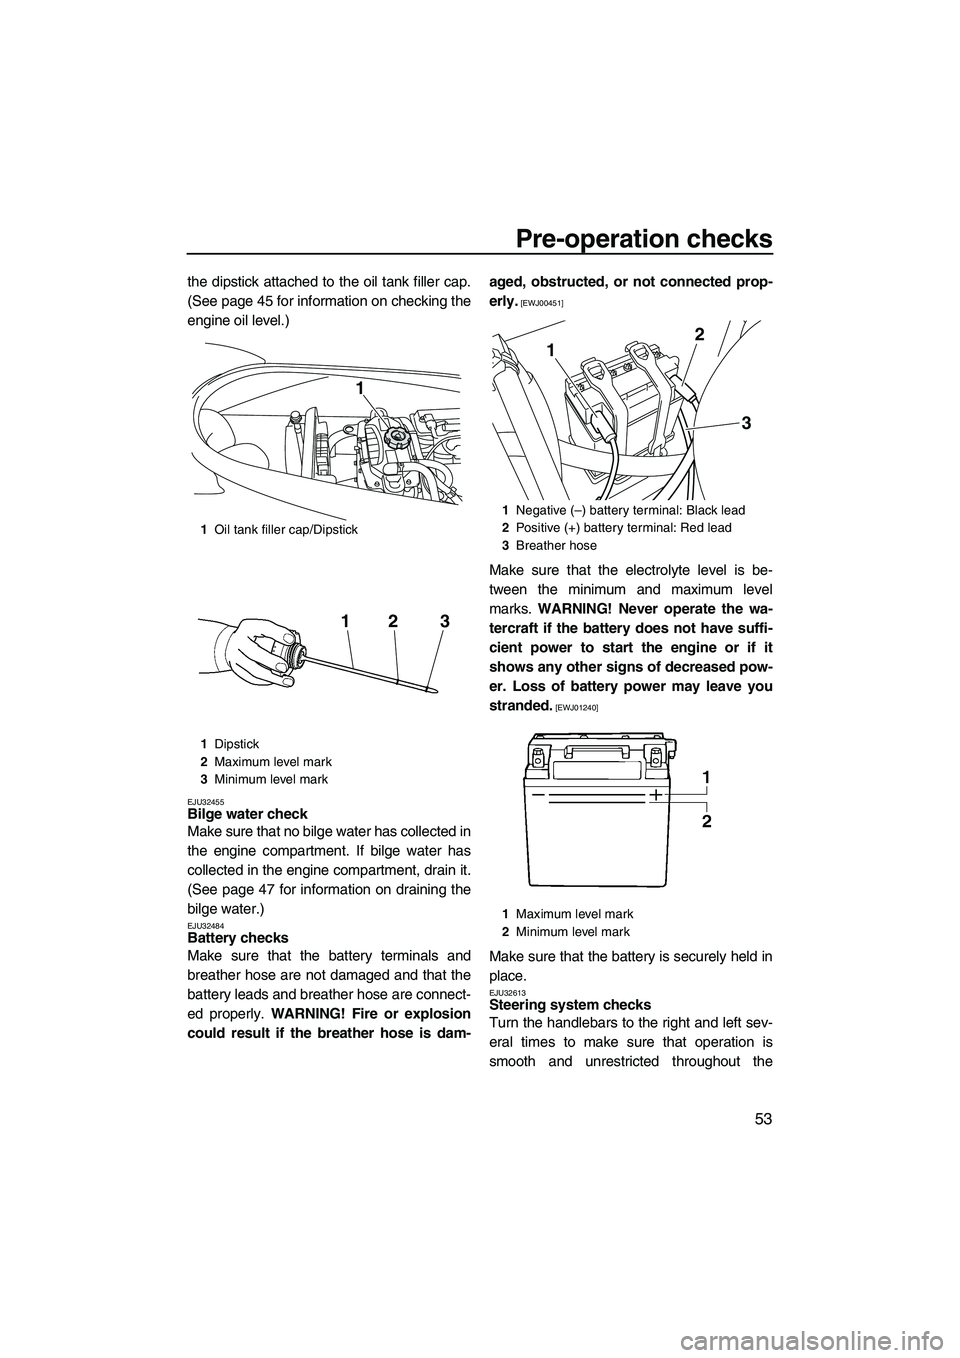 YAMAHA VX DELUXE 2013  Owners Manual Pre-operation checks
53
the dipstick attached to the oil tank filler cap.
(See page 45 for information on checking the
engine oil level.)
EJU32455Bilge water check 
Make sure that no bilge water has c